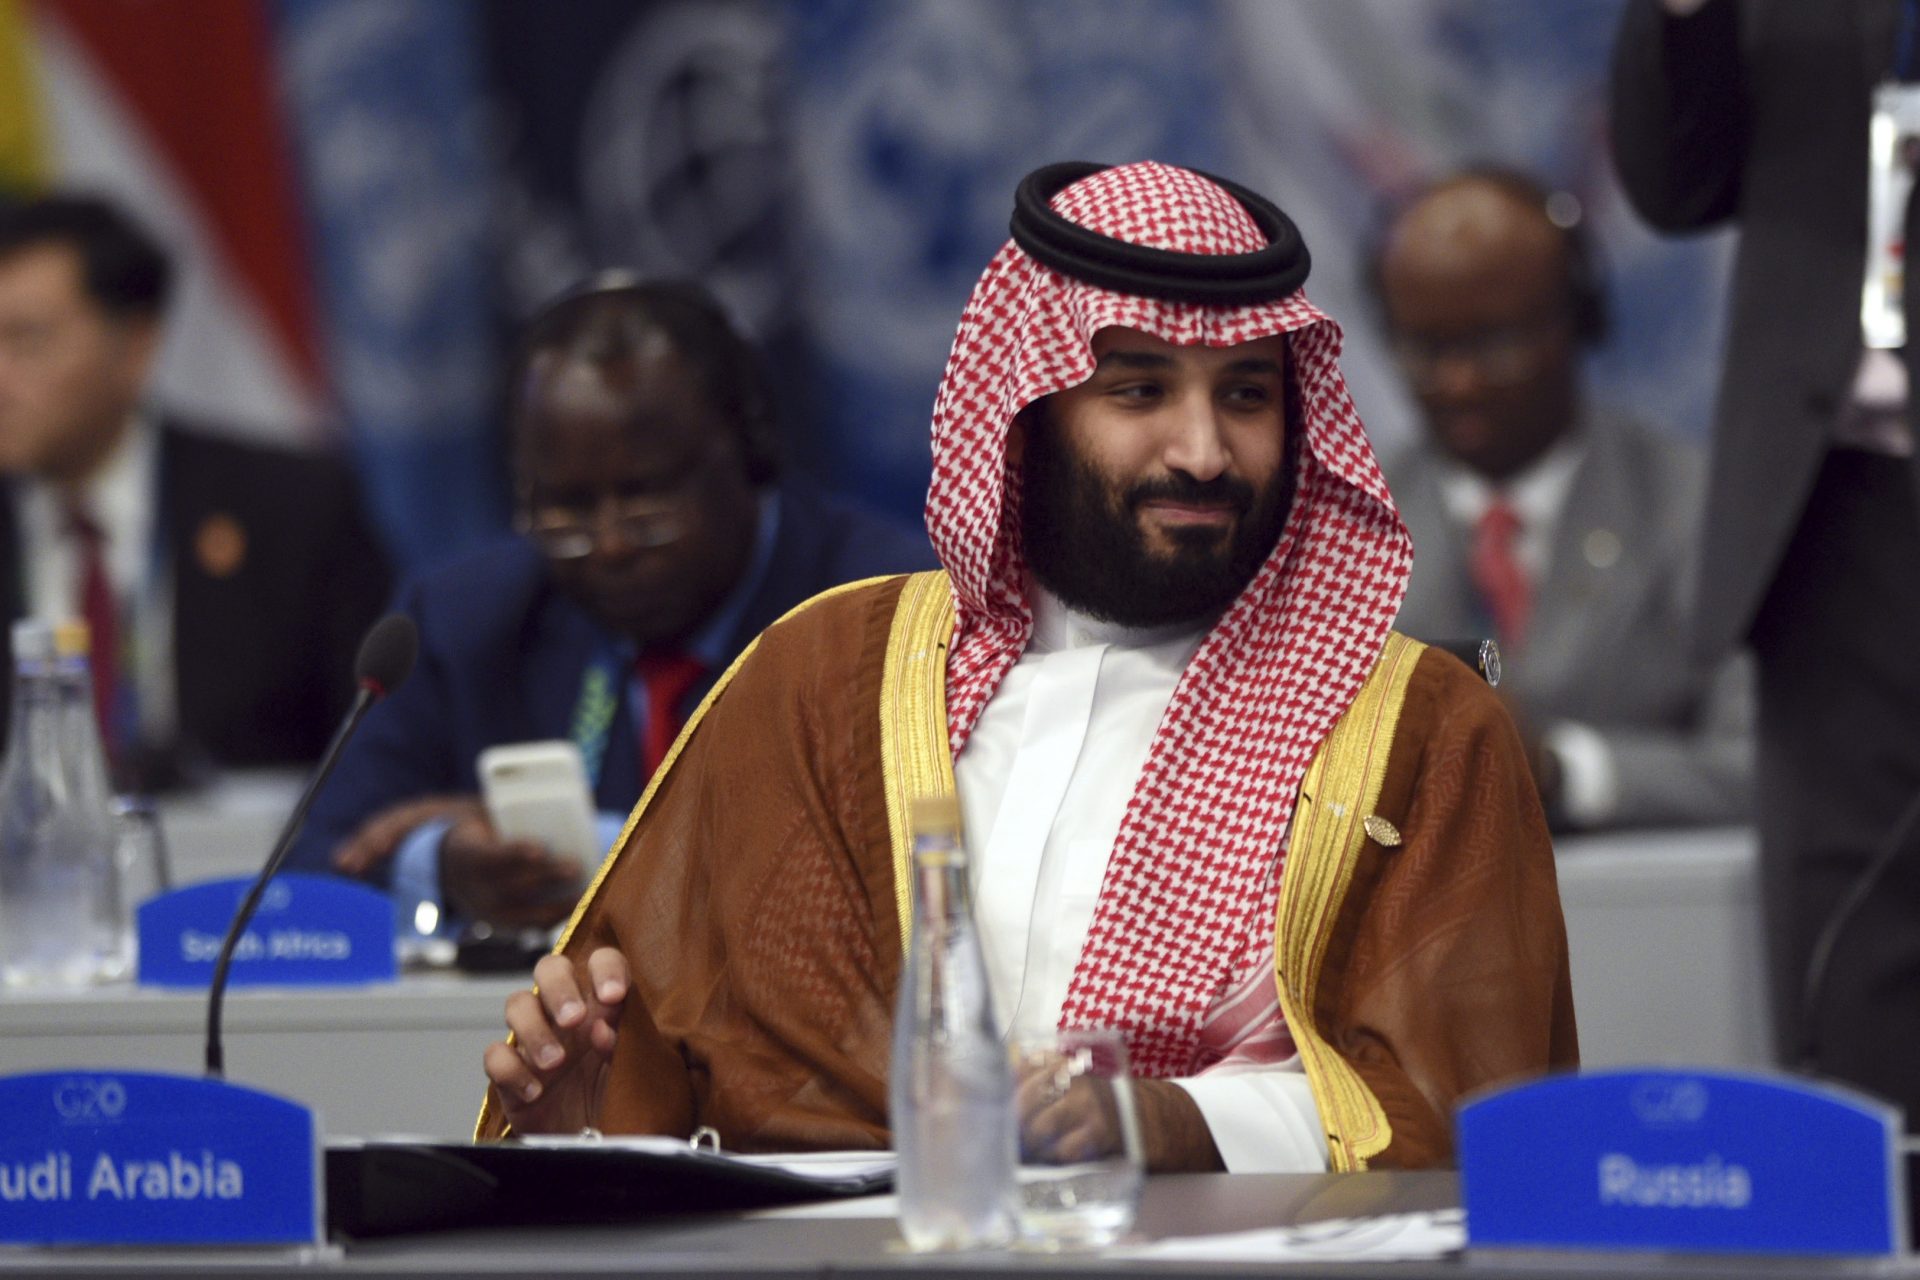 former aides to Saudi Crown Prince Mohammed bin Salman who were dismissed amid the fallout from the killing of Washington Post columnist Jamal Khashoggi